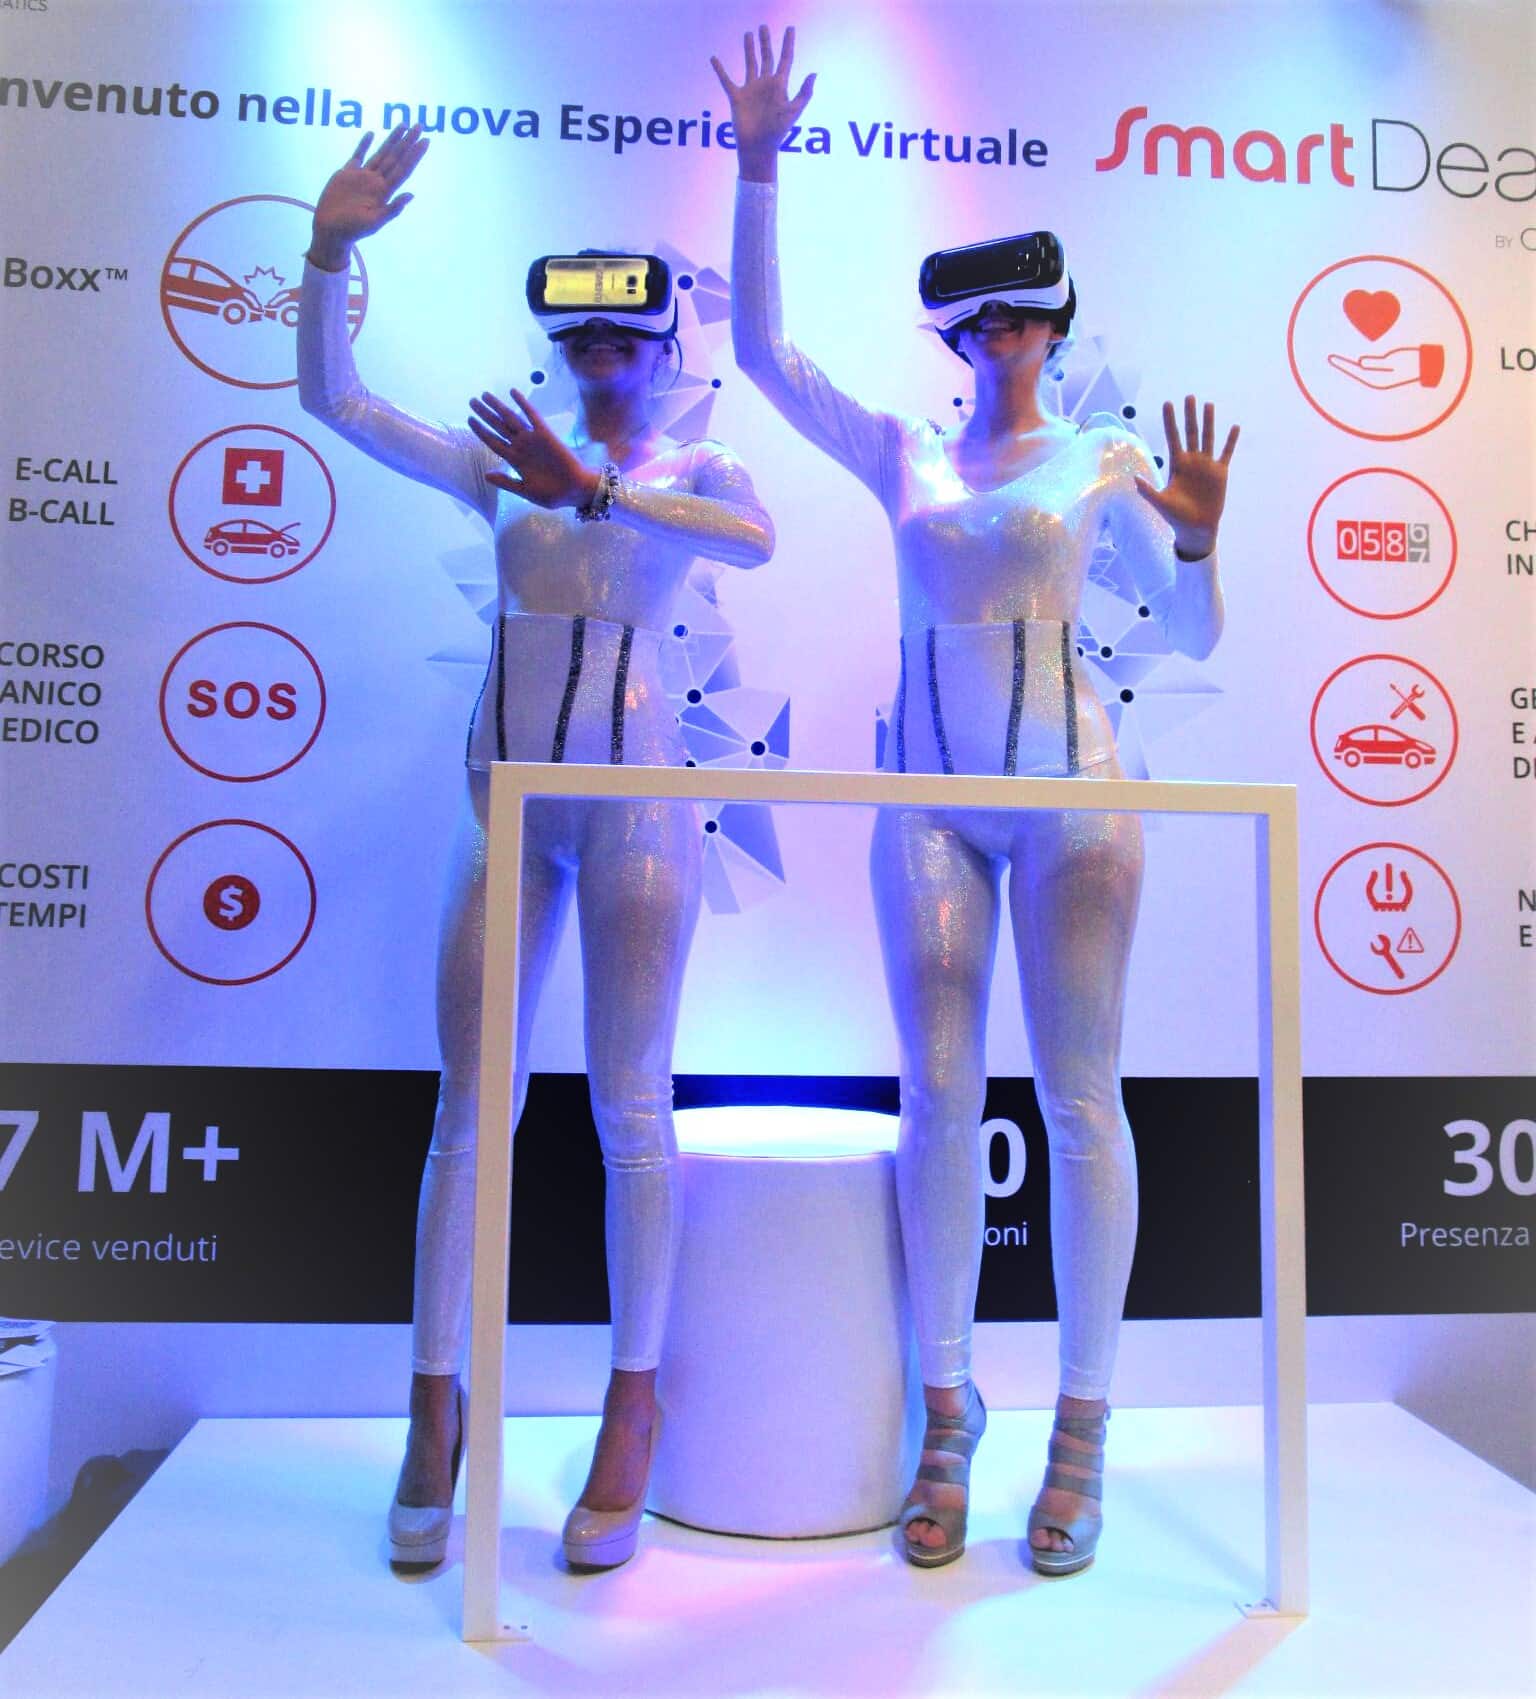 Digital device and augmented reality - Hostesses and promoters